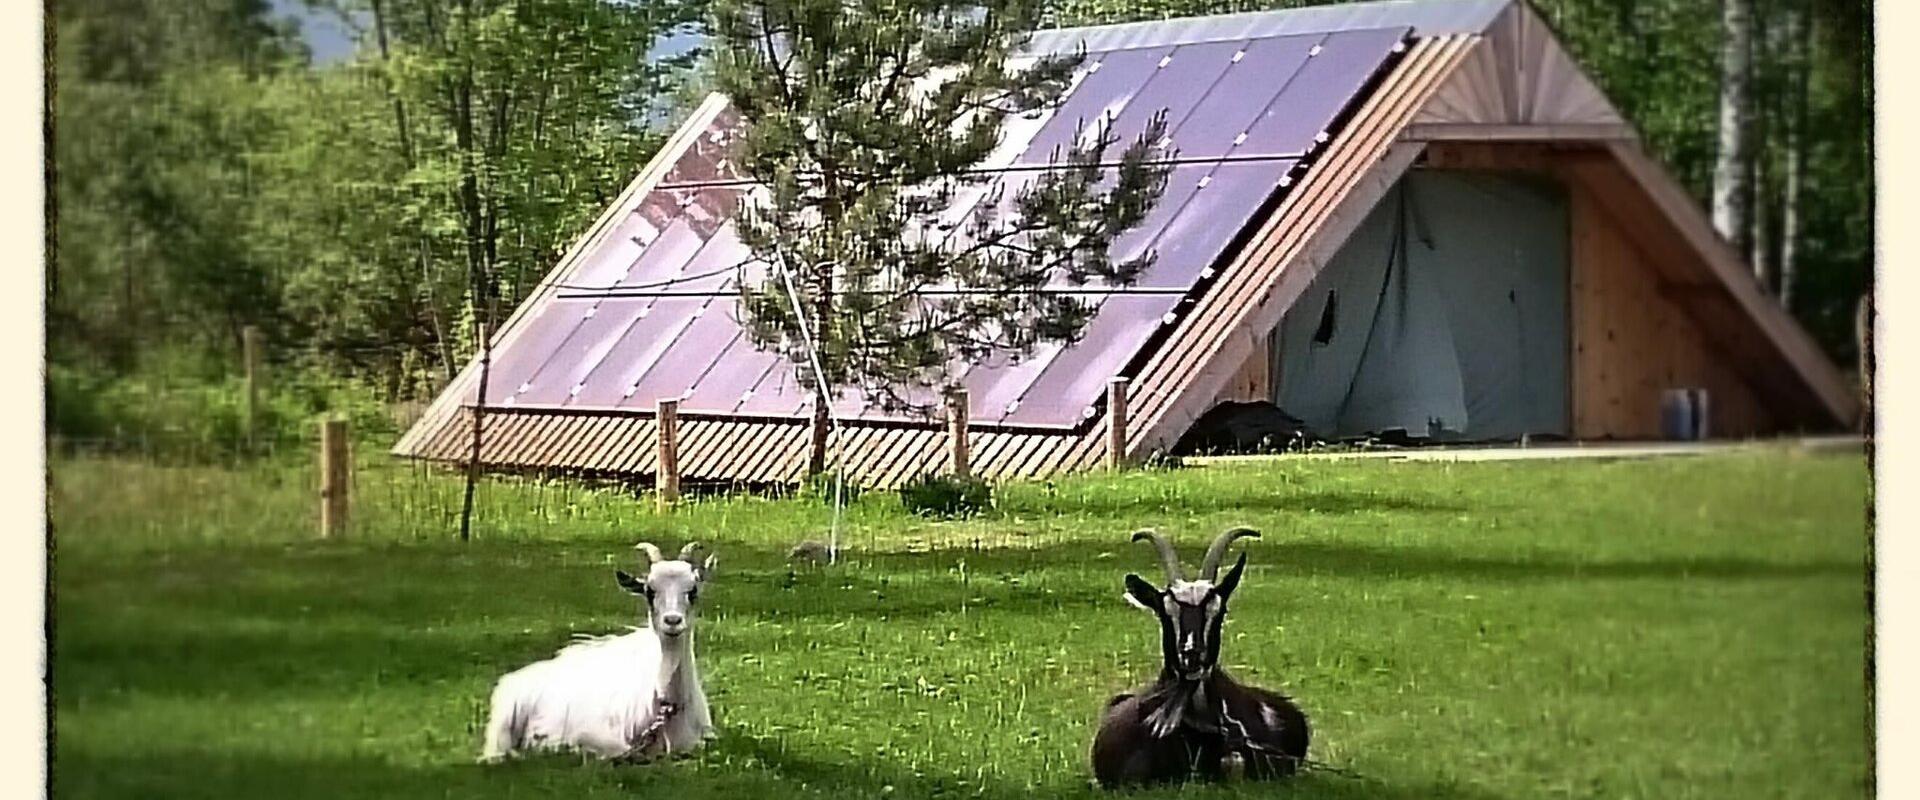 A black and a white goat at the Nina Houses (straw bale houses) enjoying their day on the grass